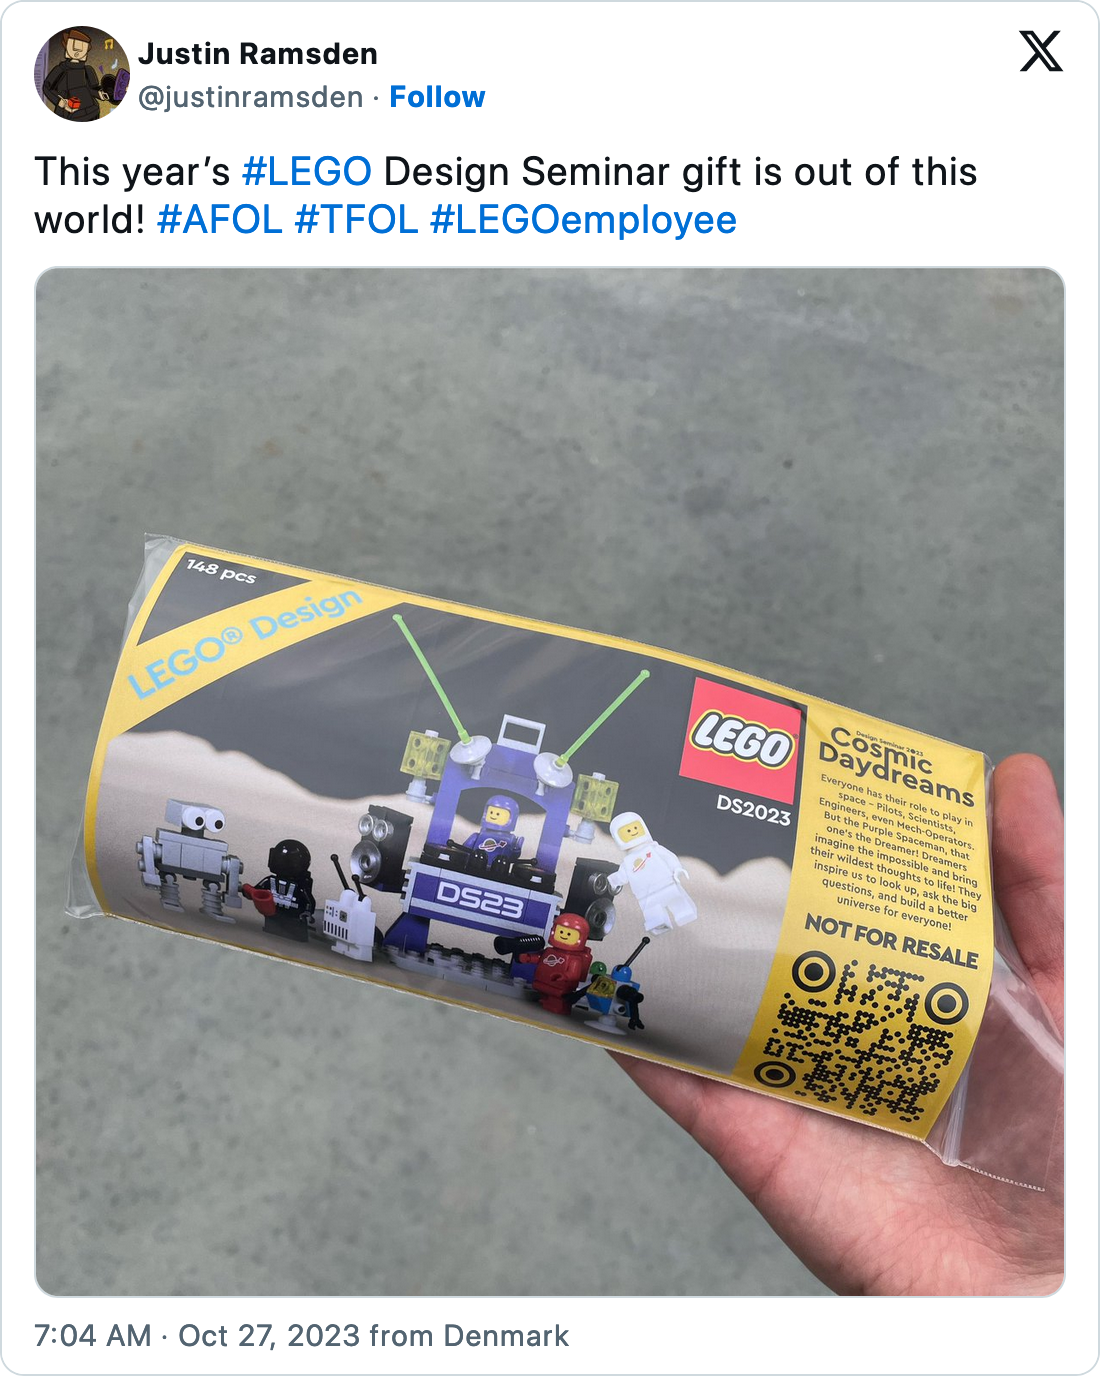 [Tweet](https://twitter.com/justinramsden/status/1717905071881499043) revealing Lego DS2023 Cosmic Daydreams to the public